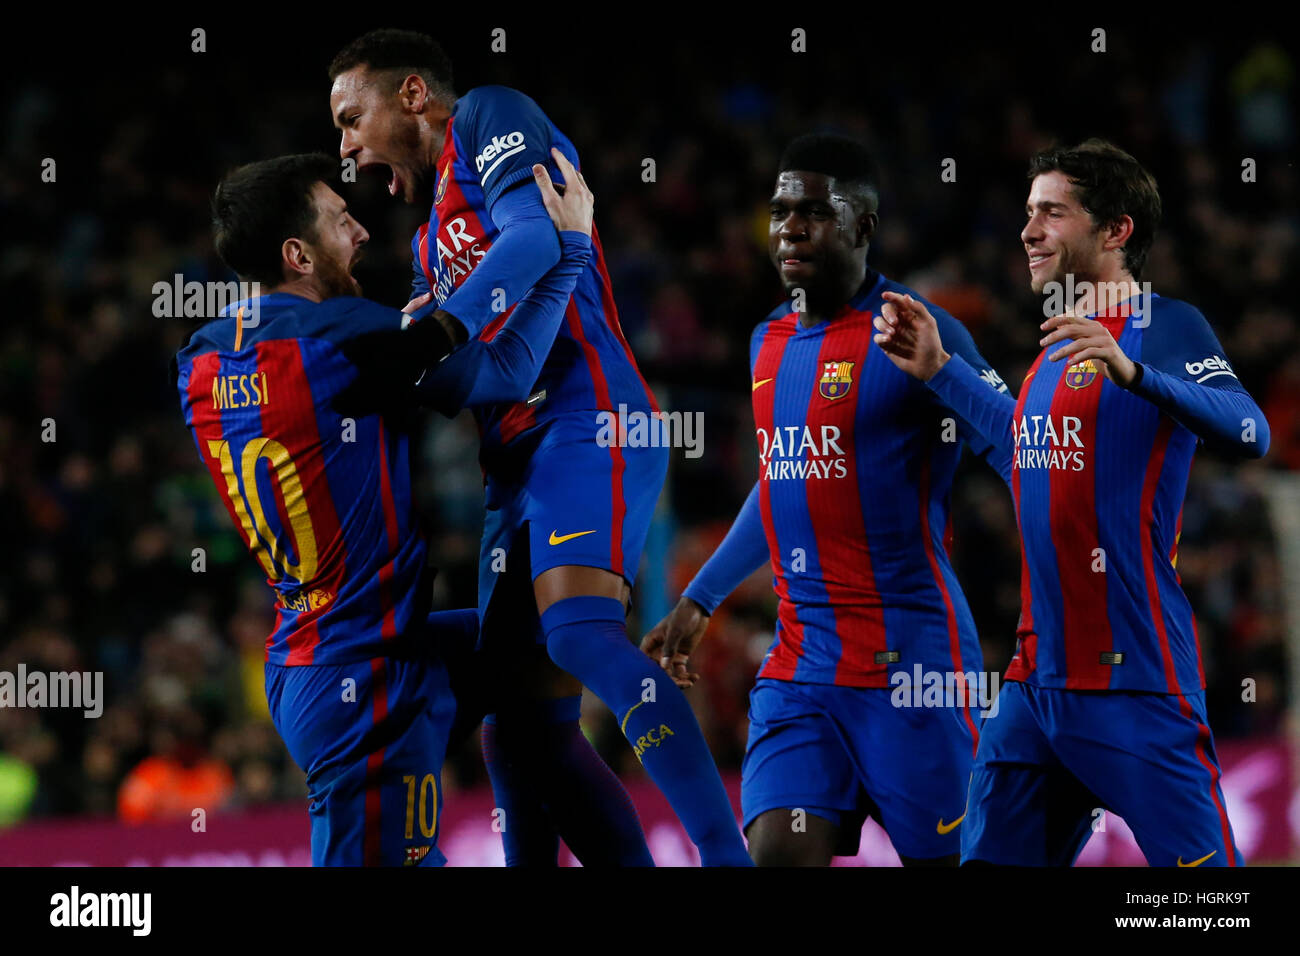 Barcelona, Spain. 11th Jan, 2017. Barcelona's Lionel Messi (1st L) celebrates after scoring with his teammate Neymar (2nd L) during the Spanish King's Cup soccer match FC Barcelona against Athletic de Bilbao at the Camp Nou Stadium in Barcelona, Spain, Jan. 11, 2017. Barcelona won 3-1. © Pau Barrena/Xinhua/Alamy Live News Stock Photo